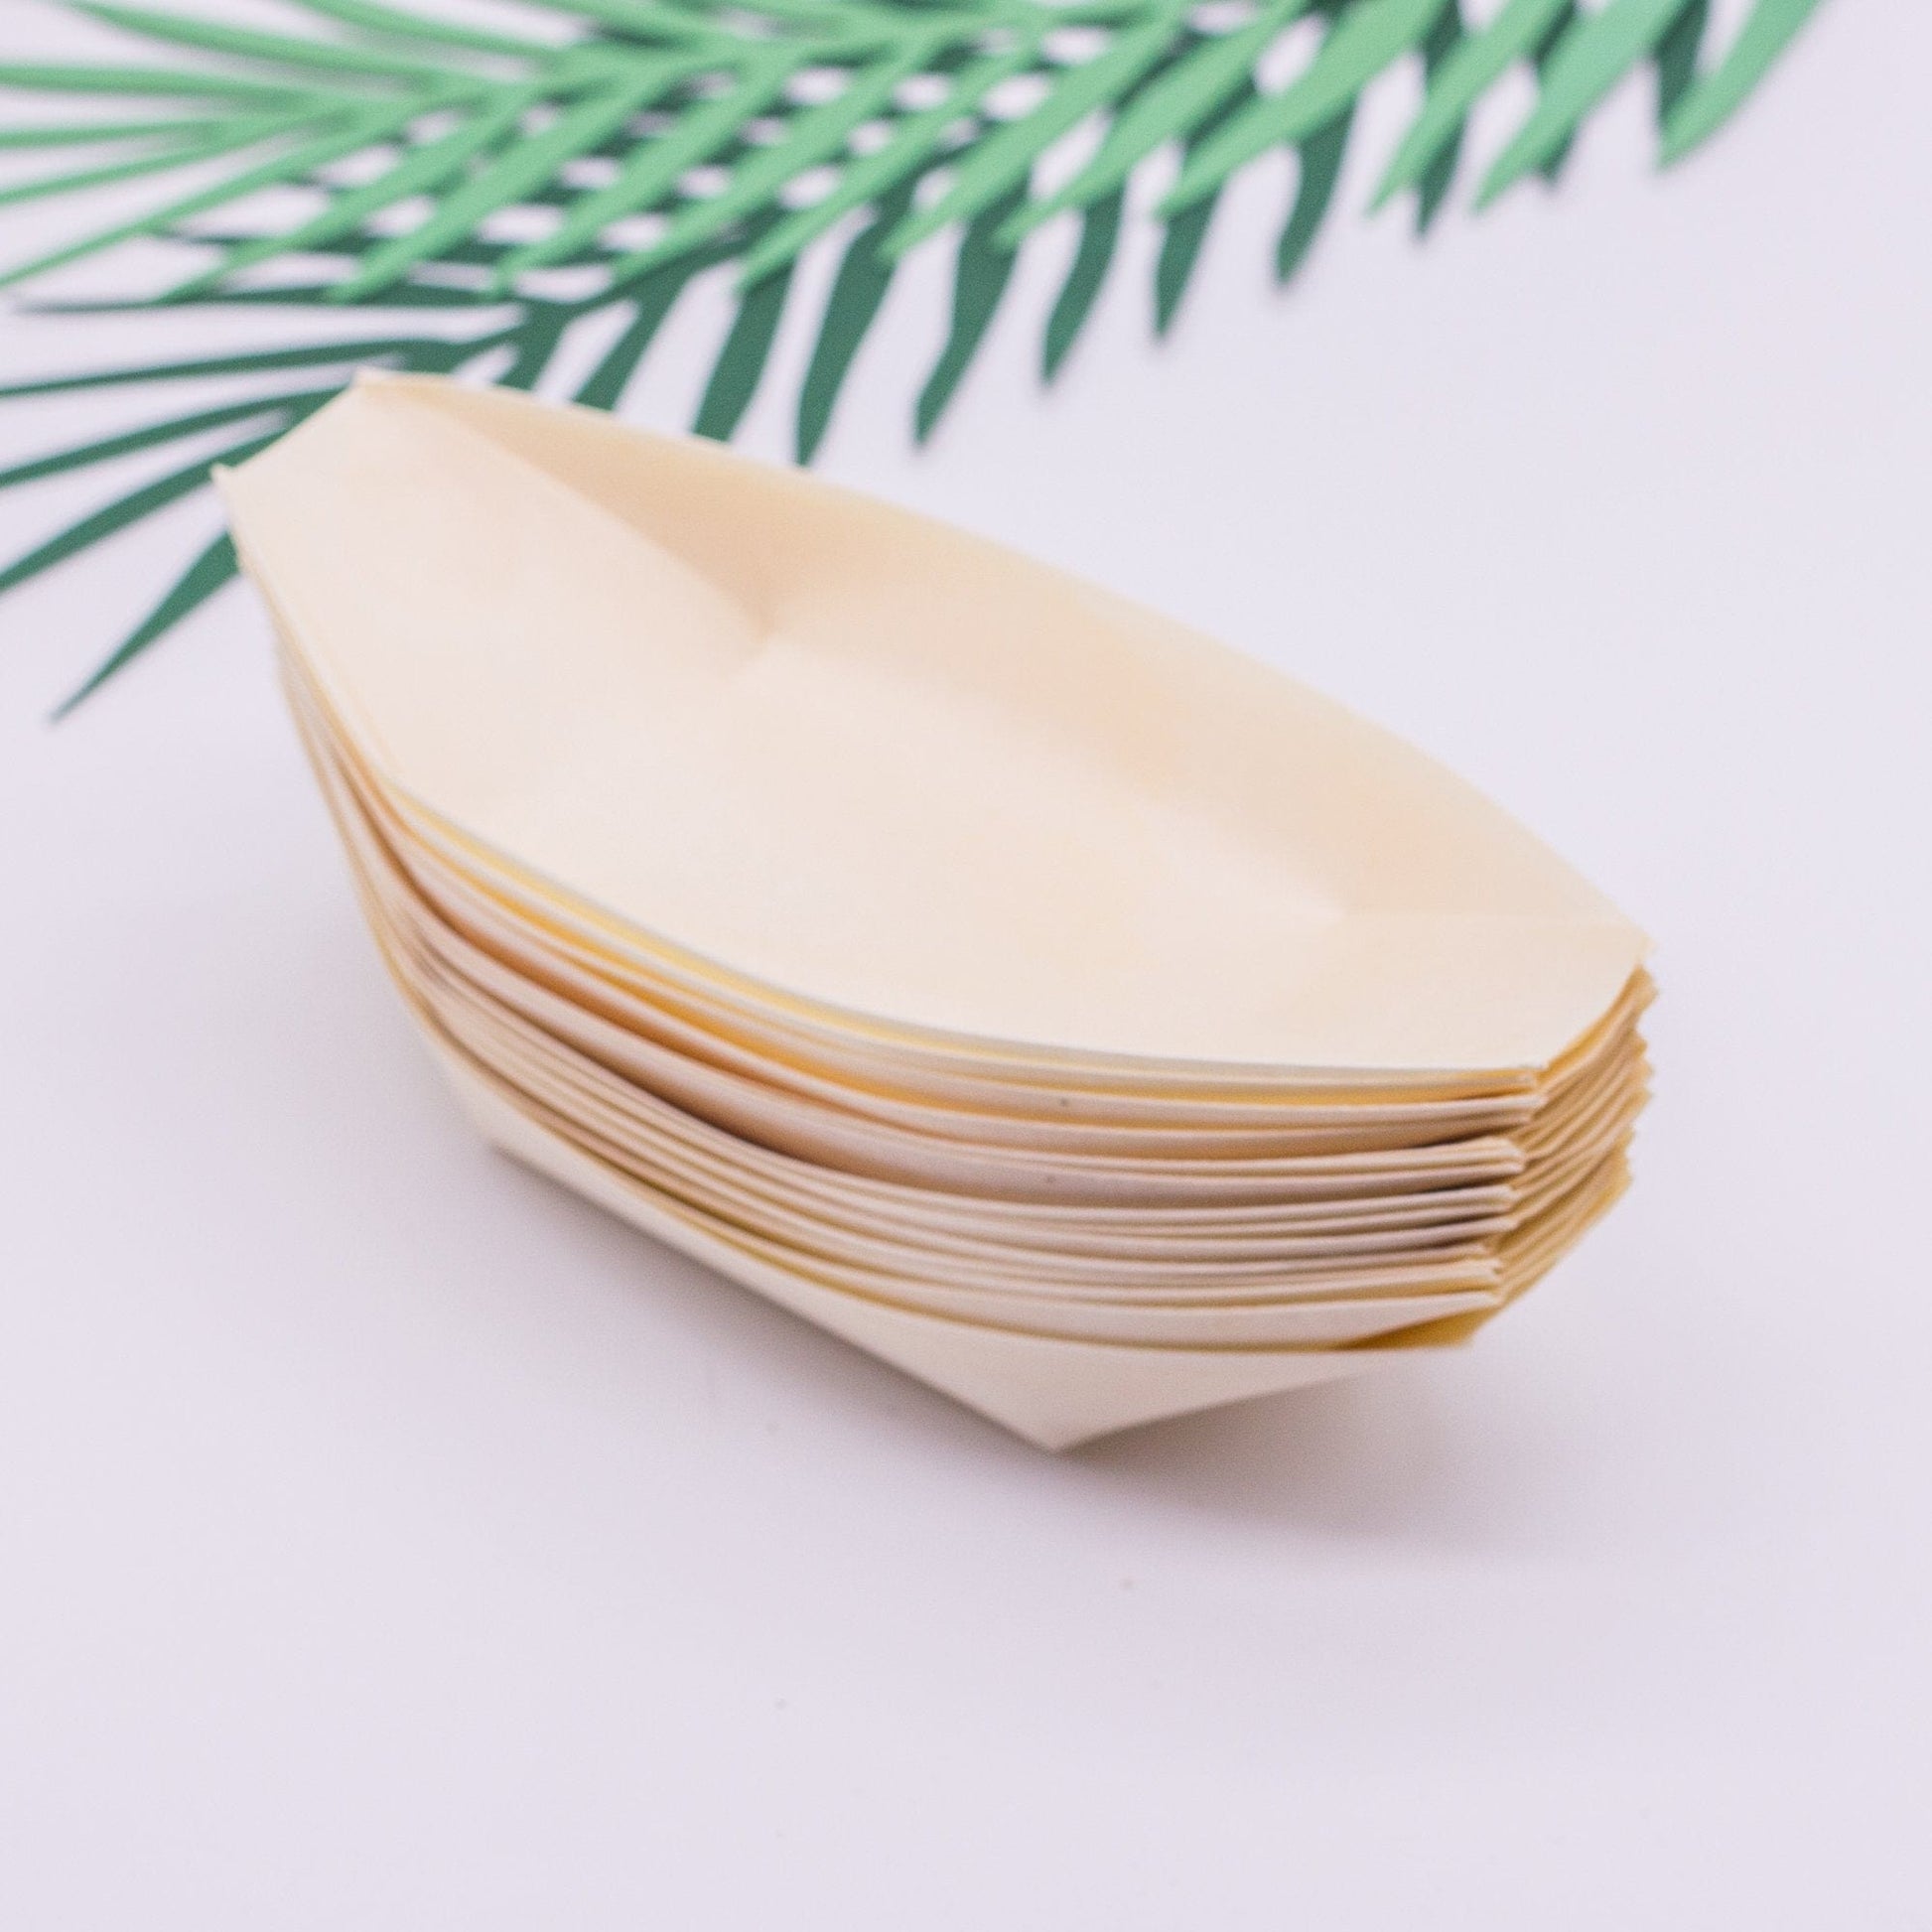 Wooden Canape Boats | Eco Disposable Party Supplies UK Pretty Little Party Shop